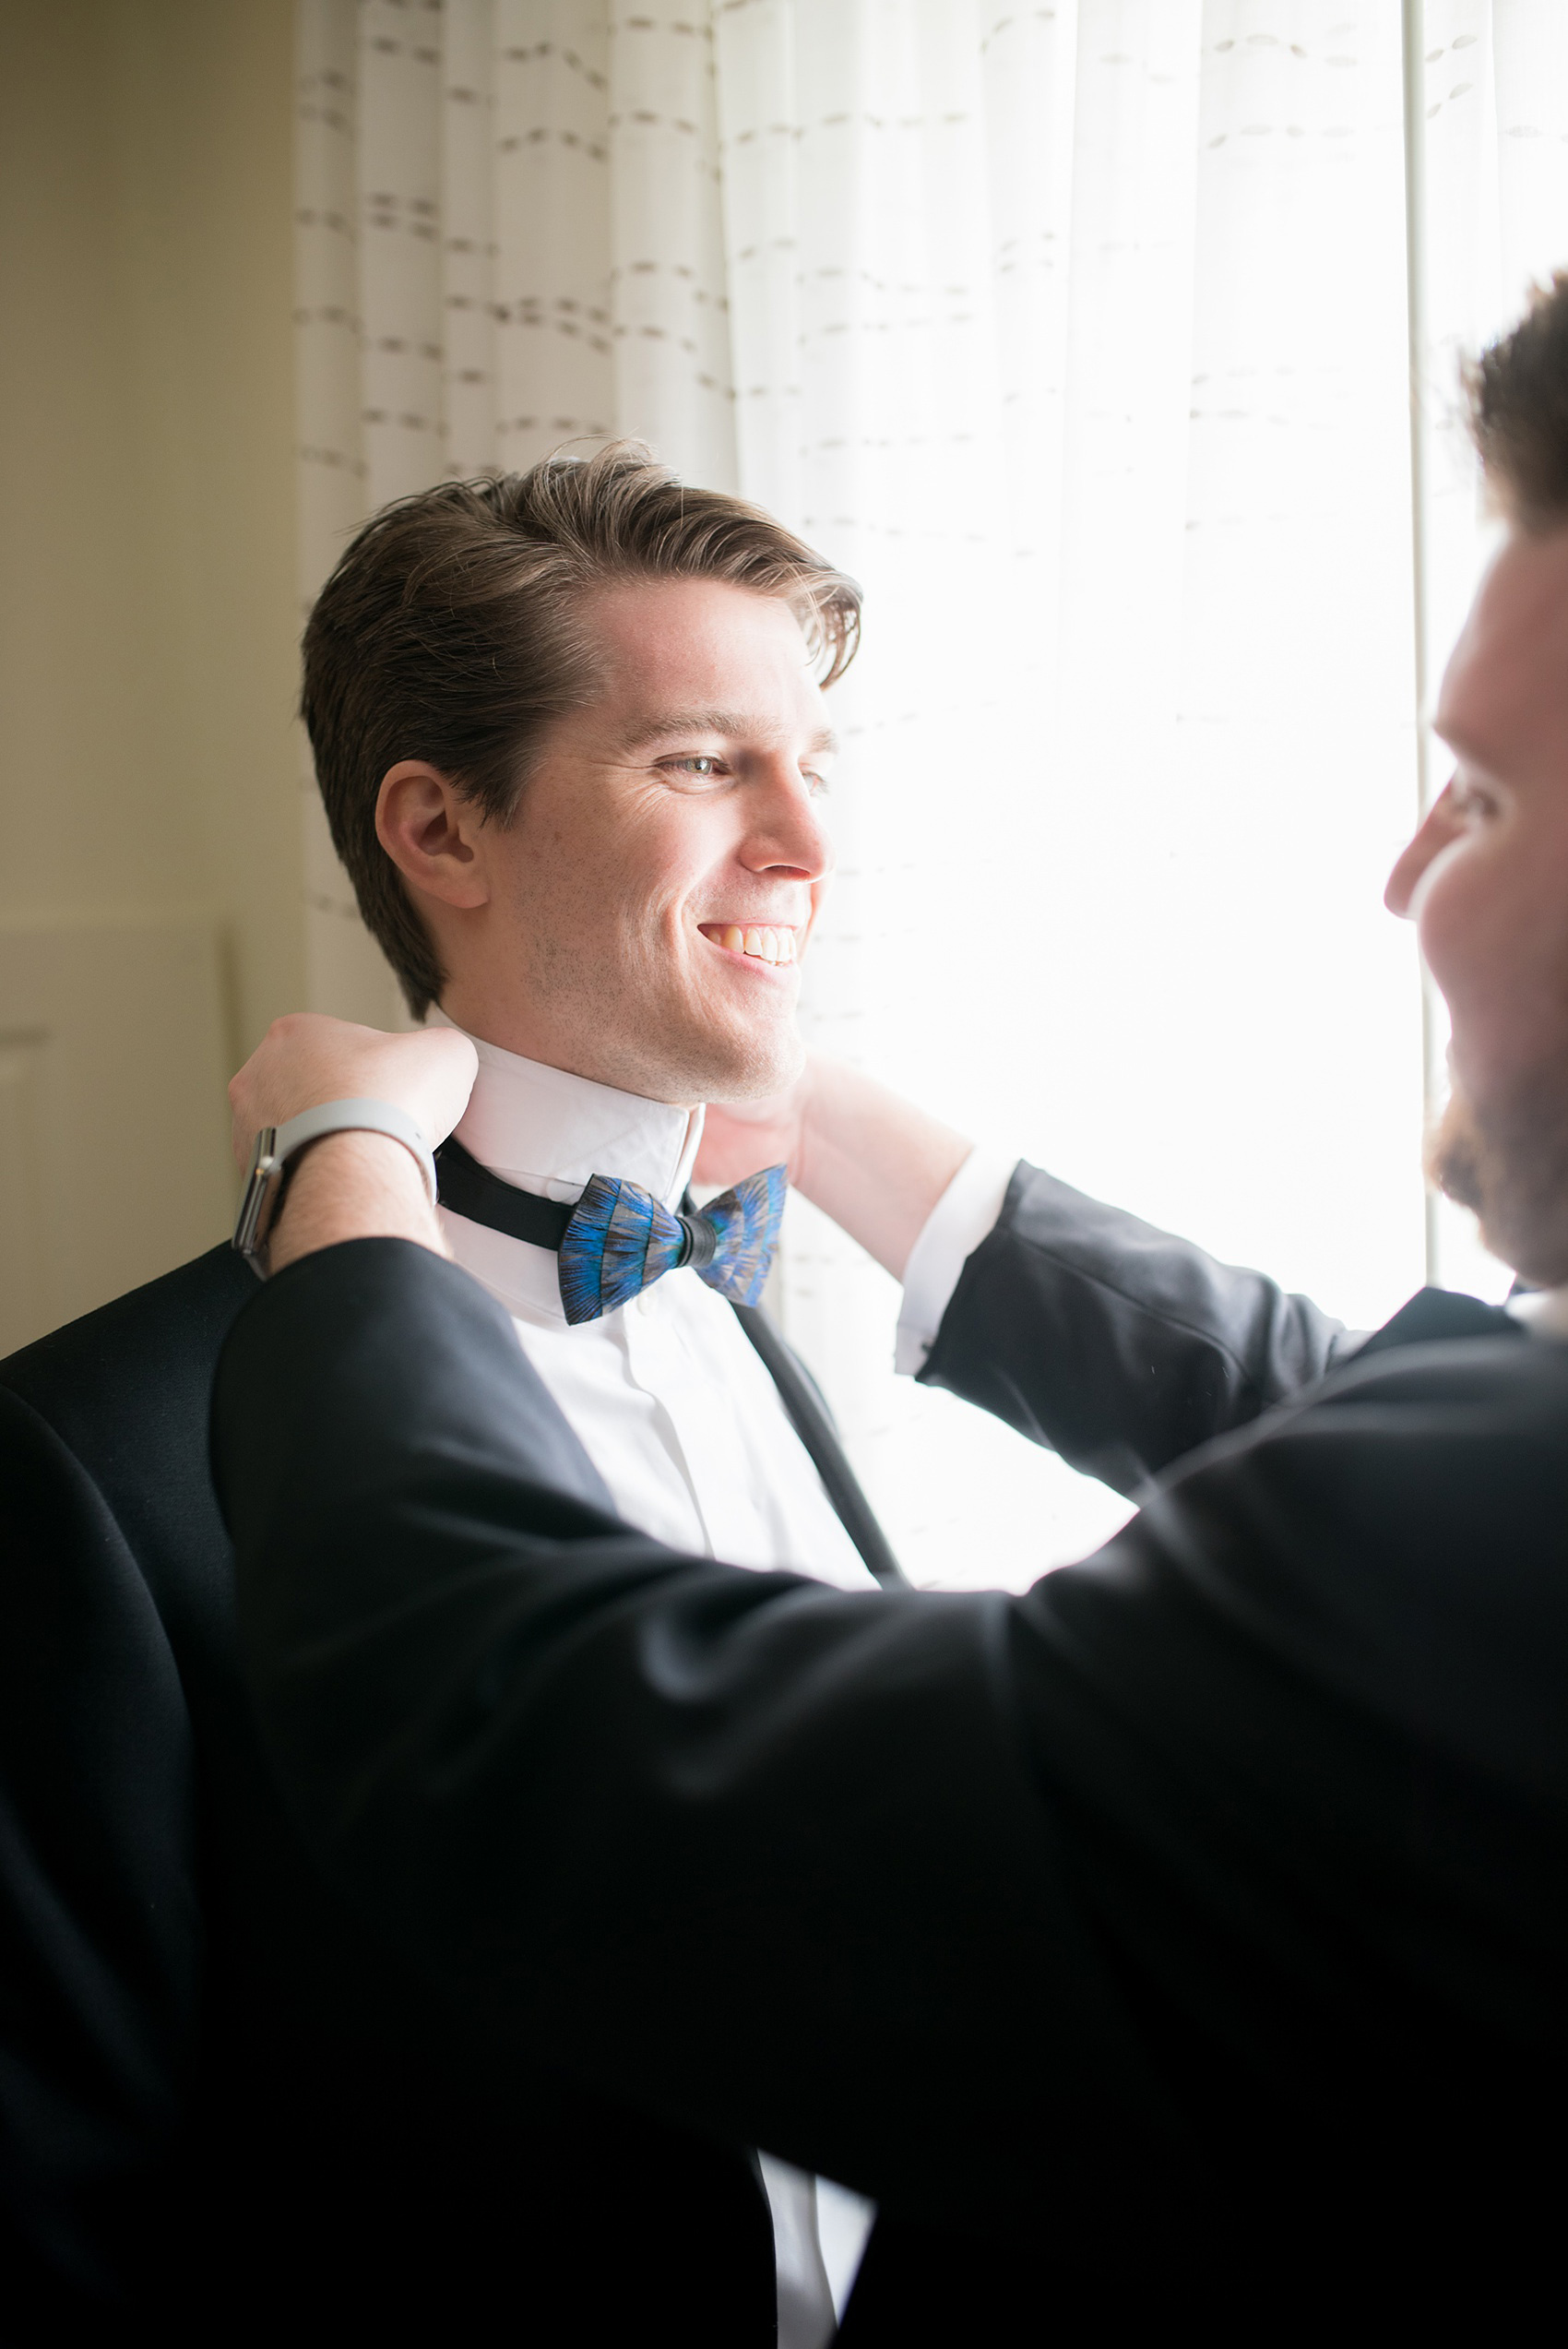 Mikkel Paige Photography photo of a wedding in Chapel Hill at Duke Chapel. A picture of the groom getting ready with his feather bow tie.